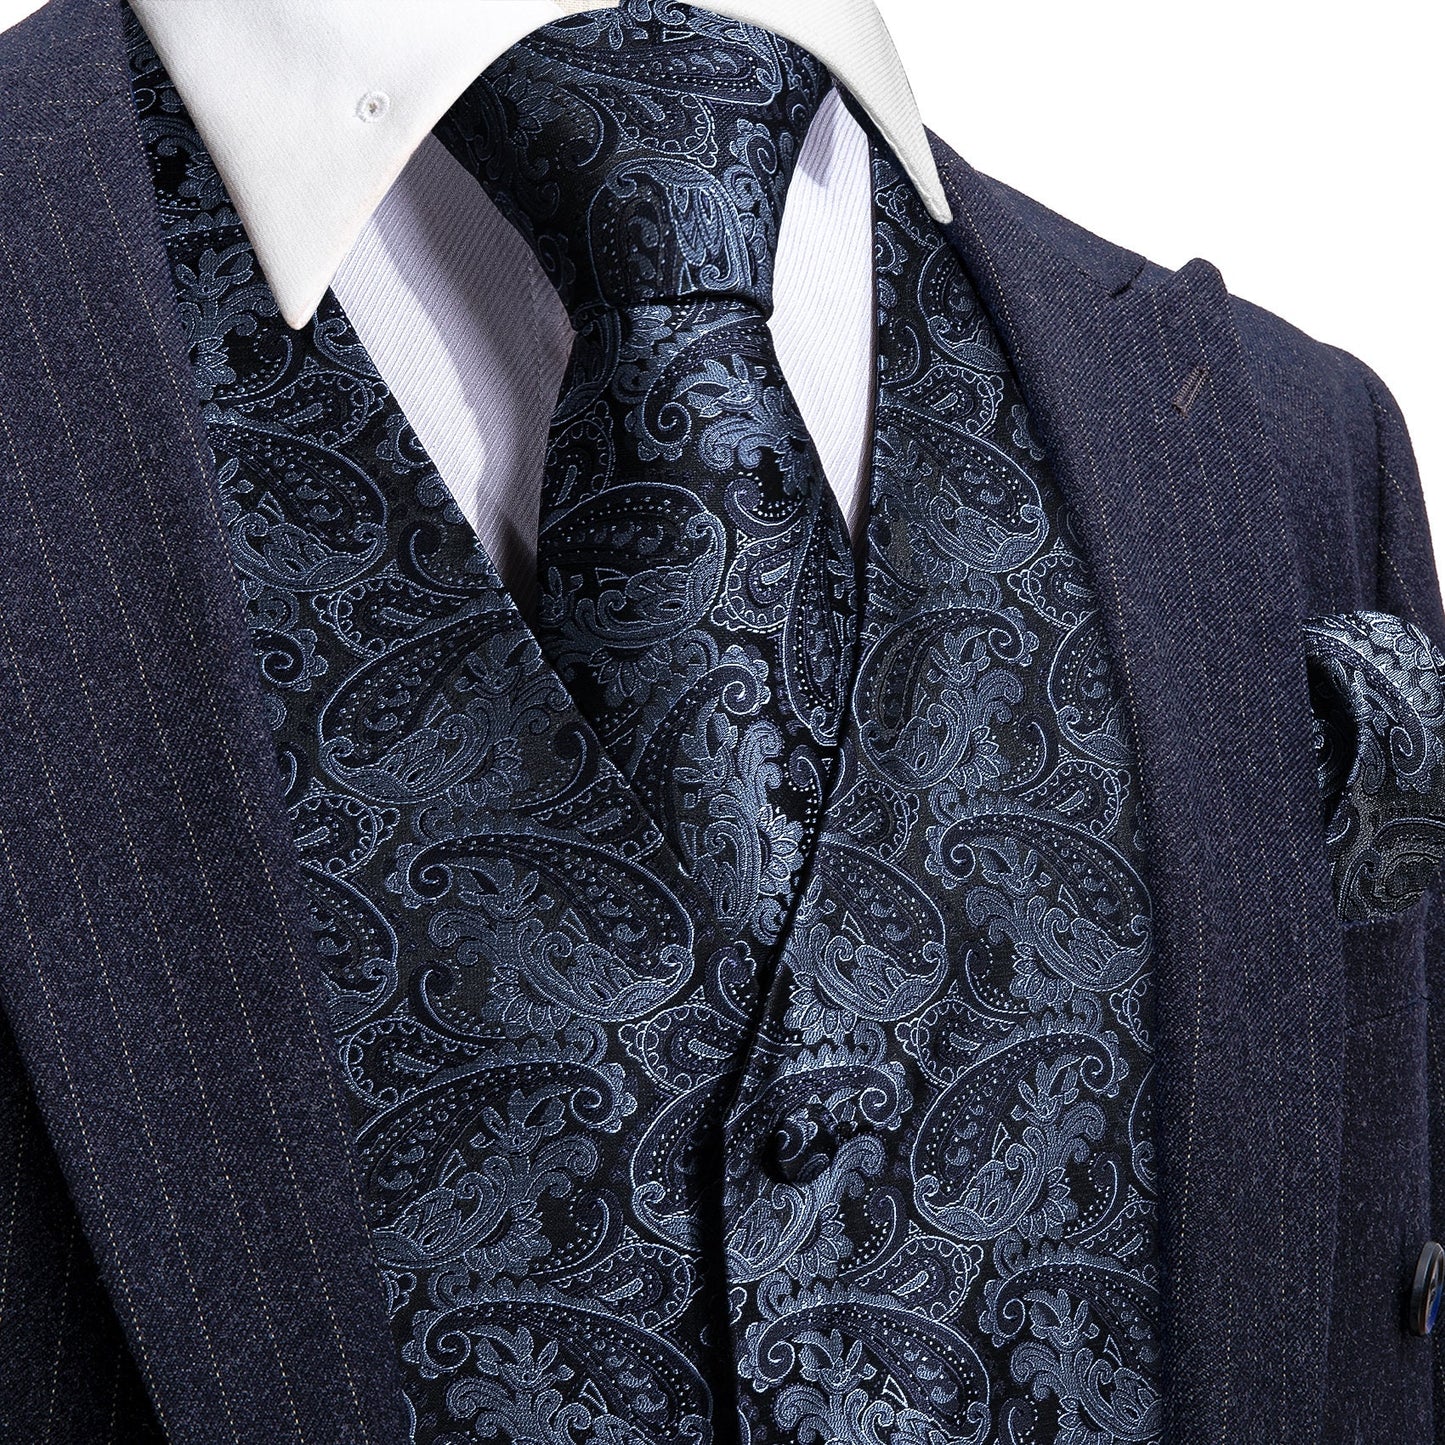 Barry Wang Blue Floral Paisley Waistcoat Men Paisley Tie hanky Set with Floral Pocket Square